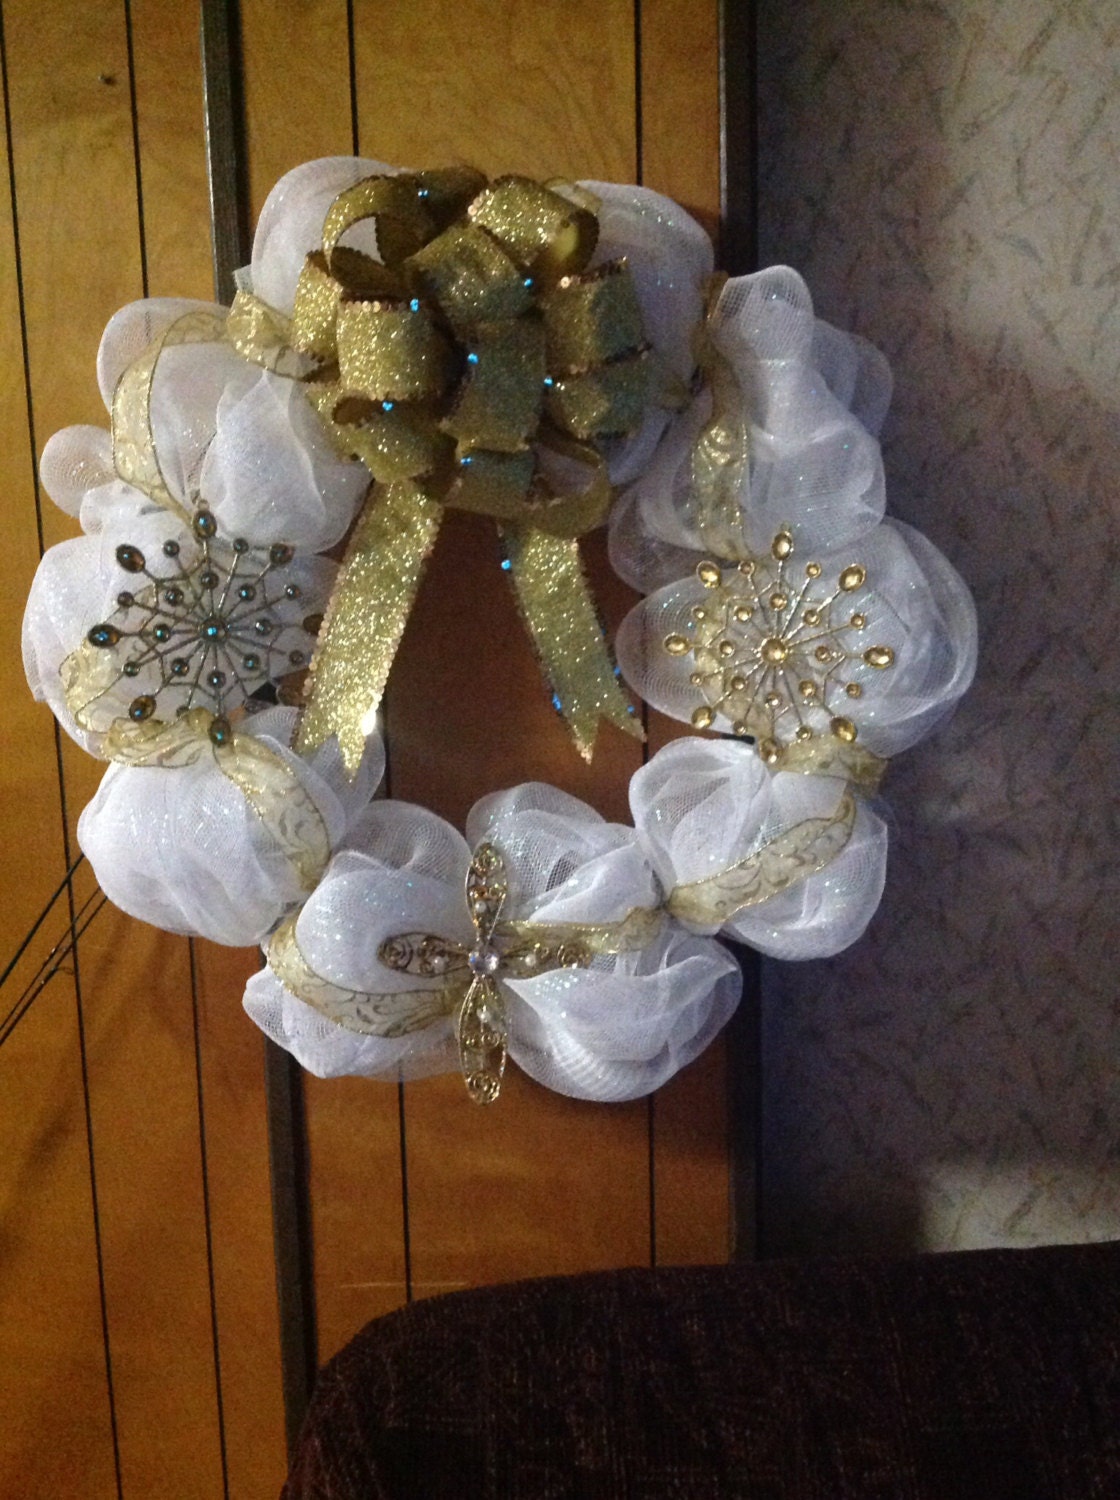 Beautiful made to order mesh wreaths for any occasion. Made to order based on your needs/ requests.